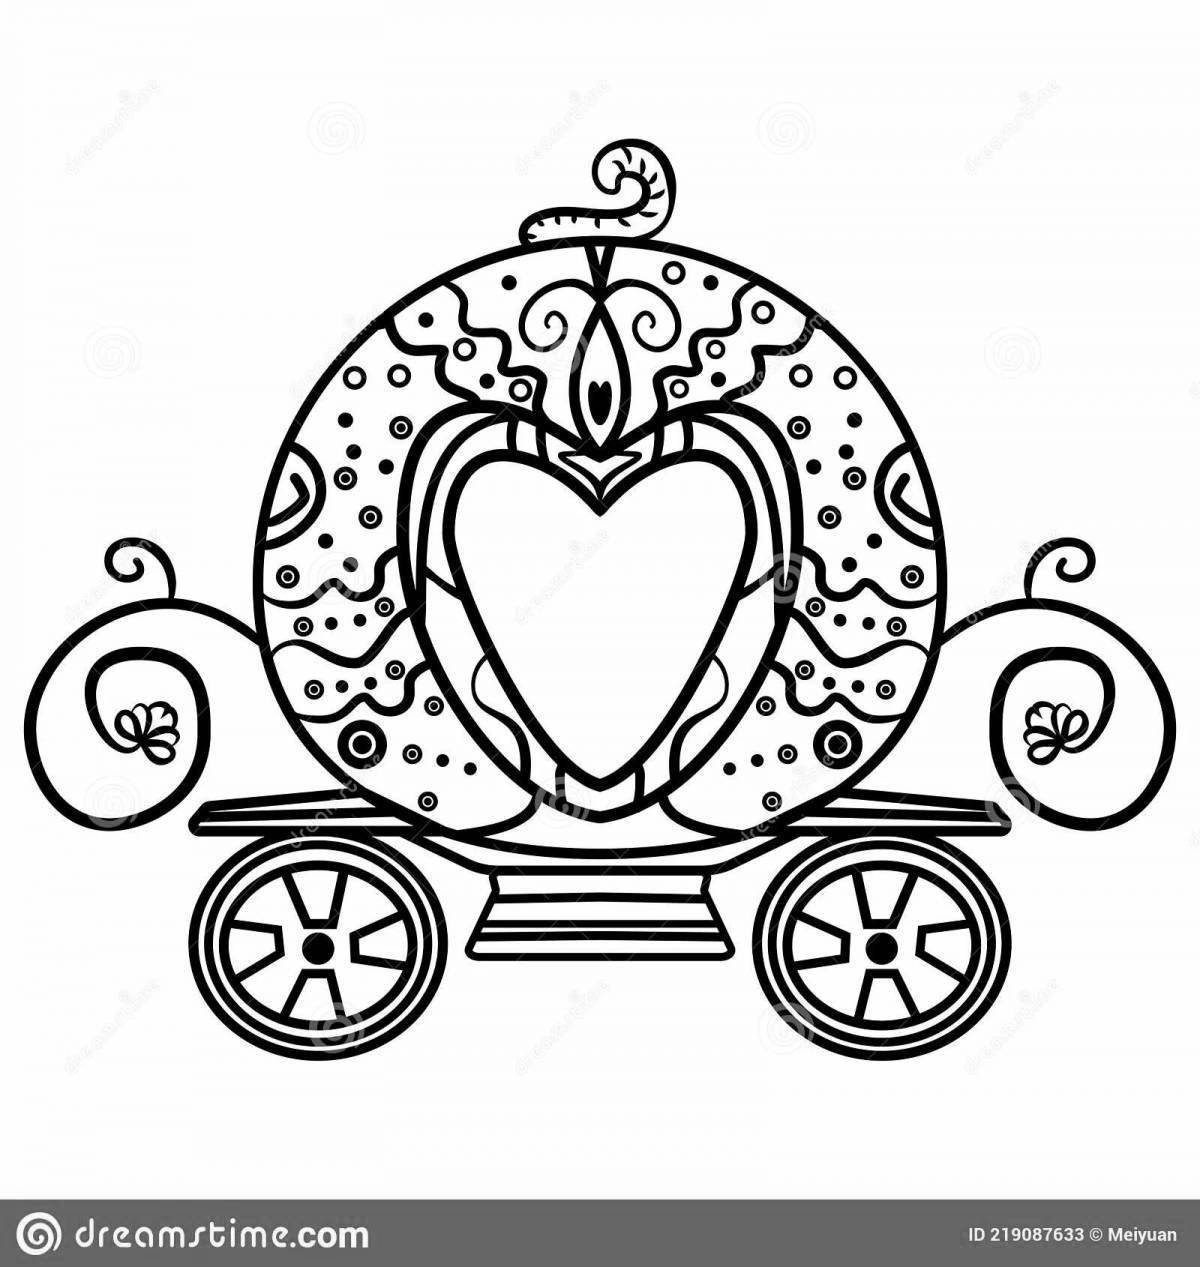 Coloring page wild princess in carriage